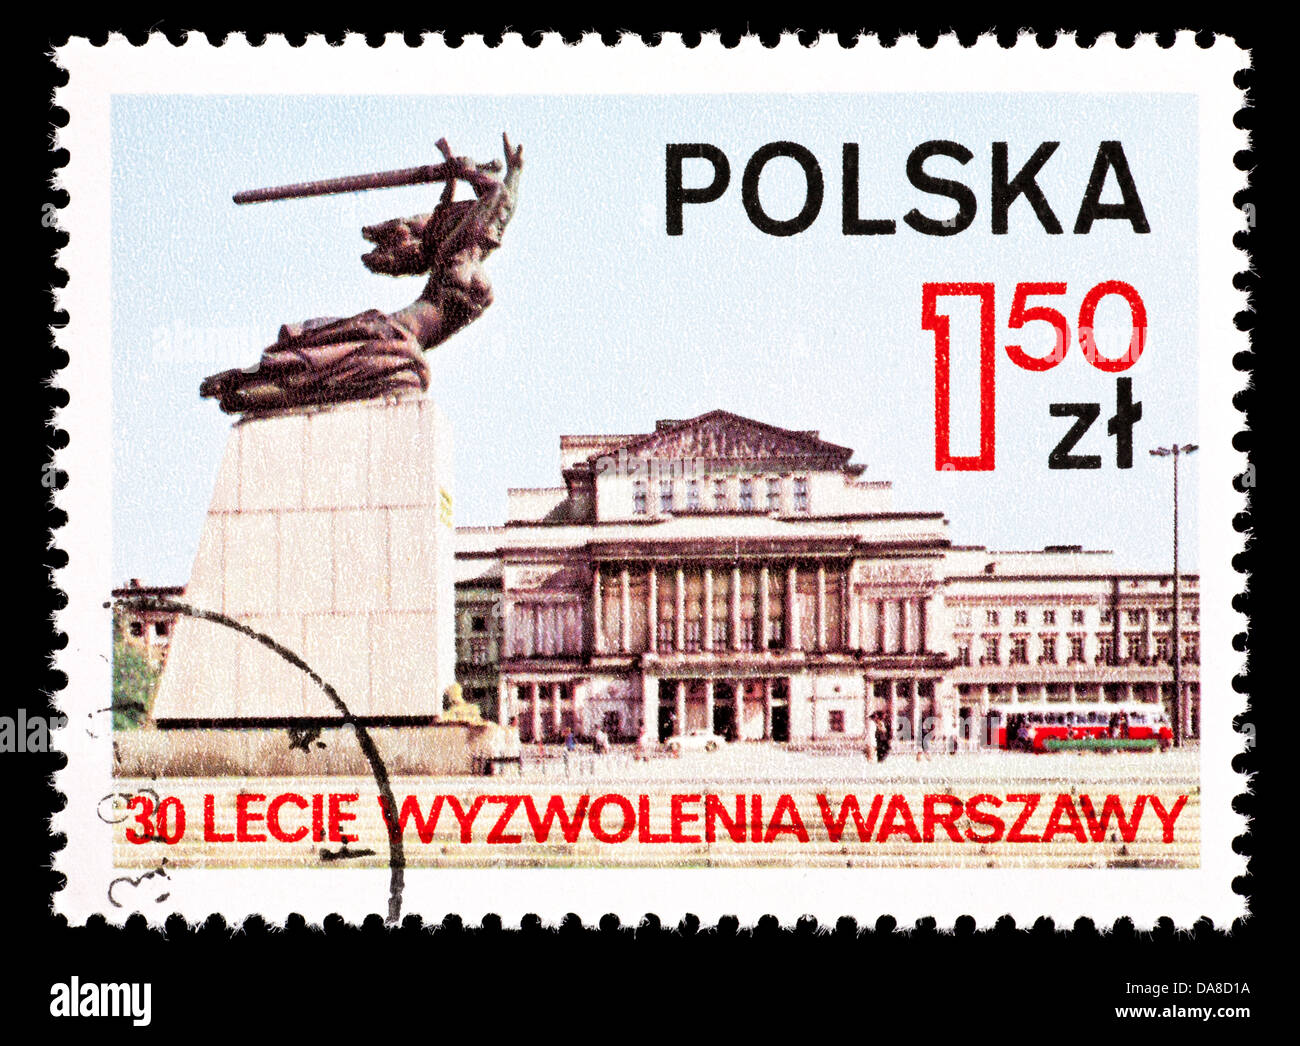 Postage stamp from Poland depicting the Nike monument and Opera house, for the 30'th anniversary of Warsaw liberation in WWII. Stock Photo